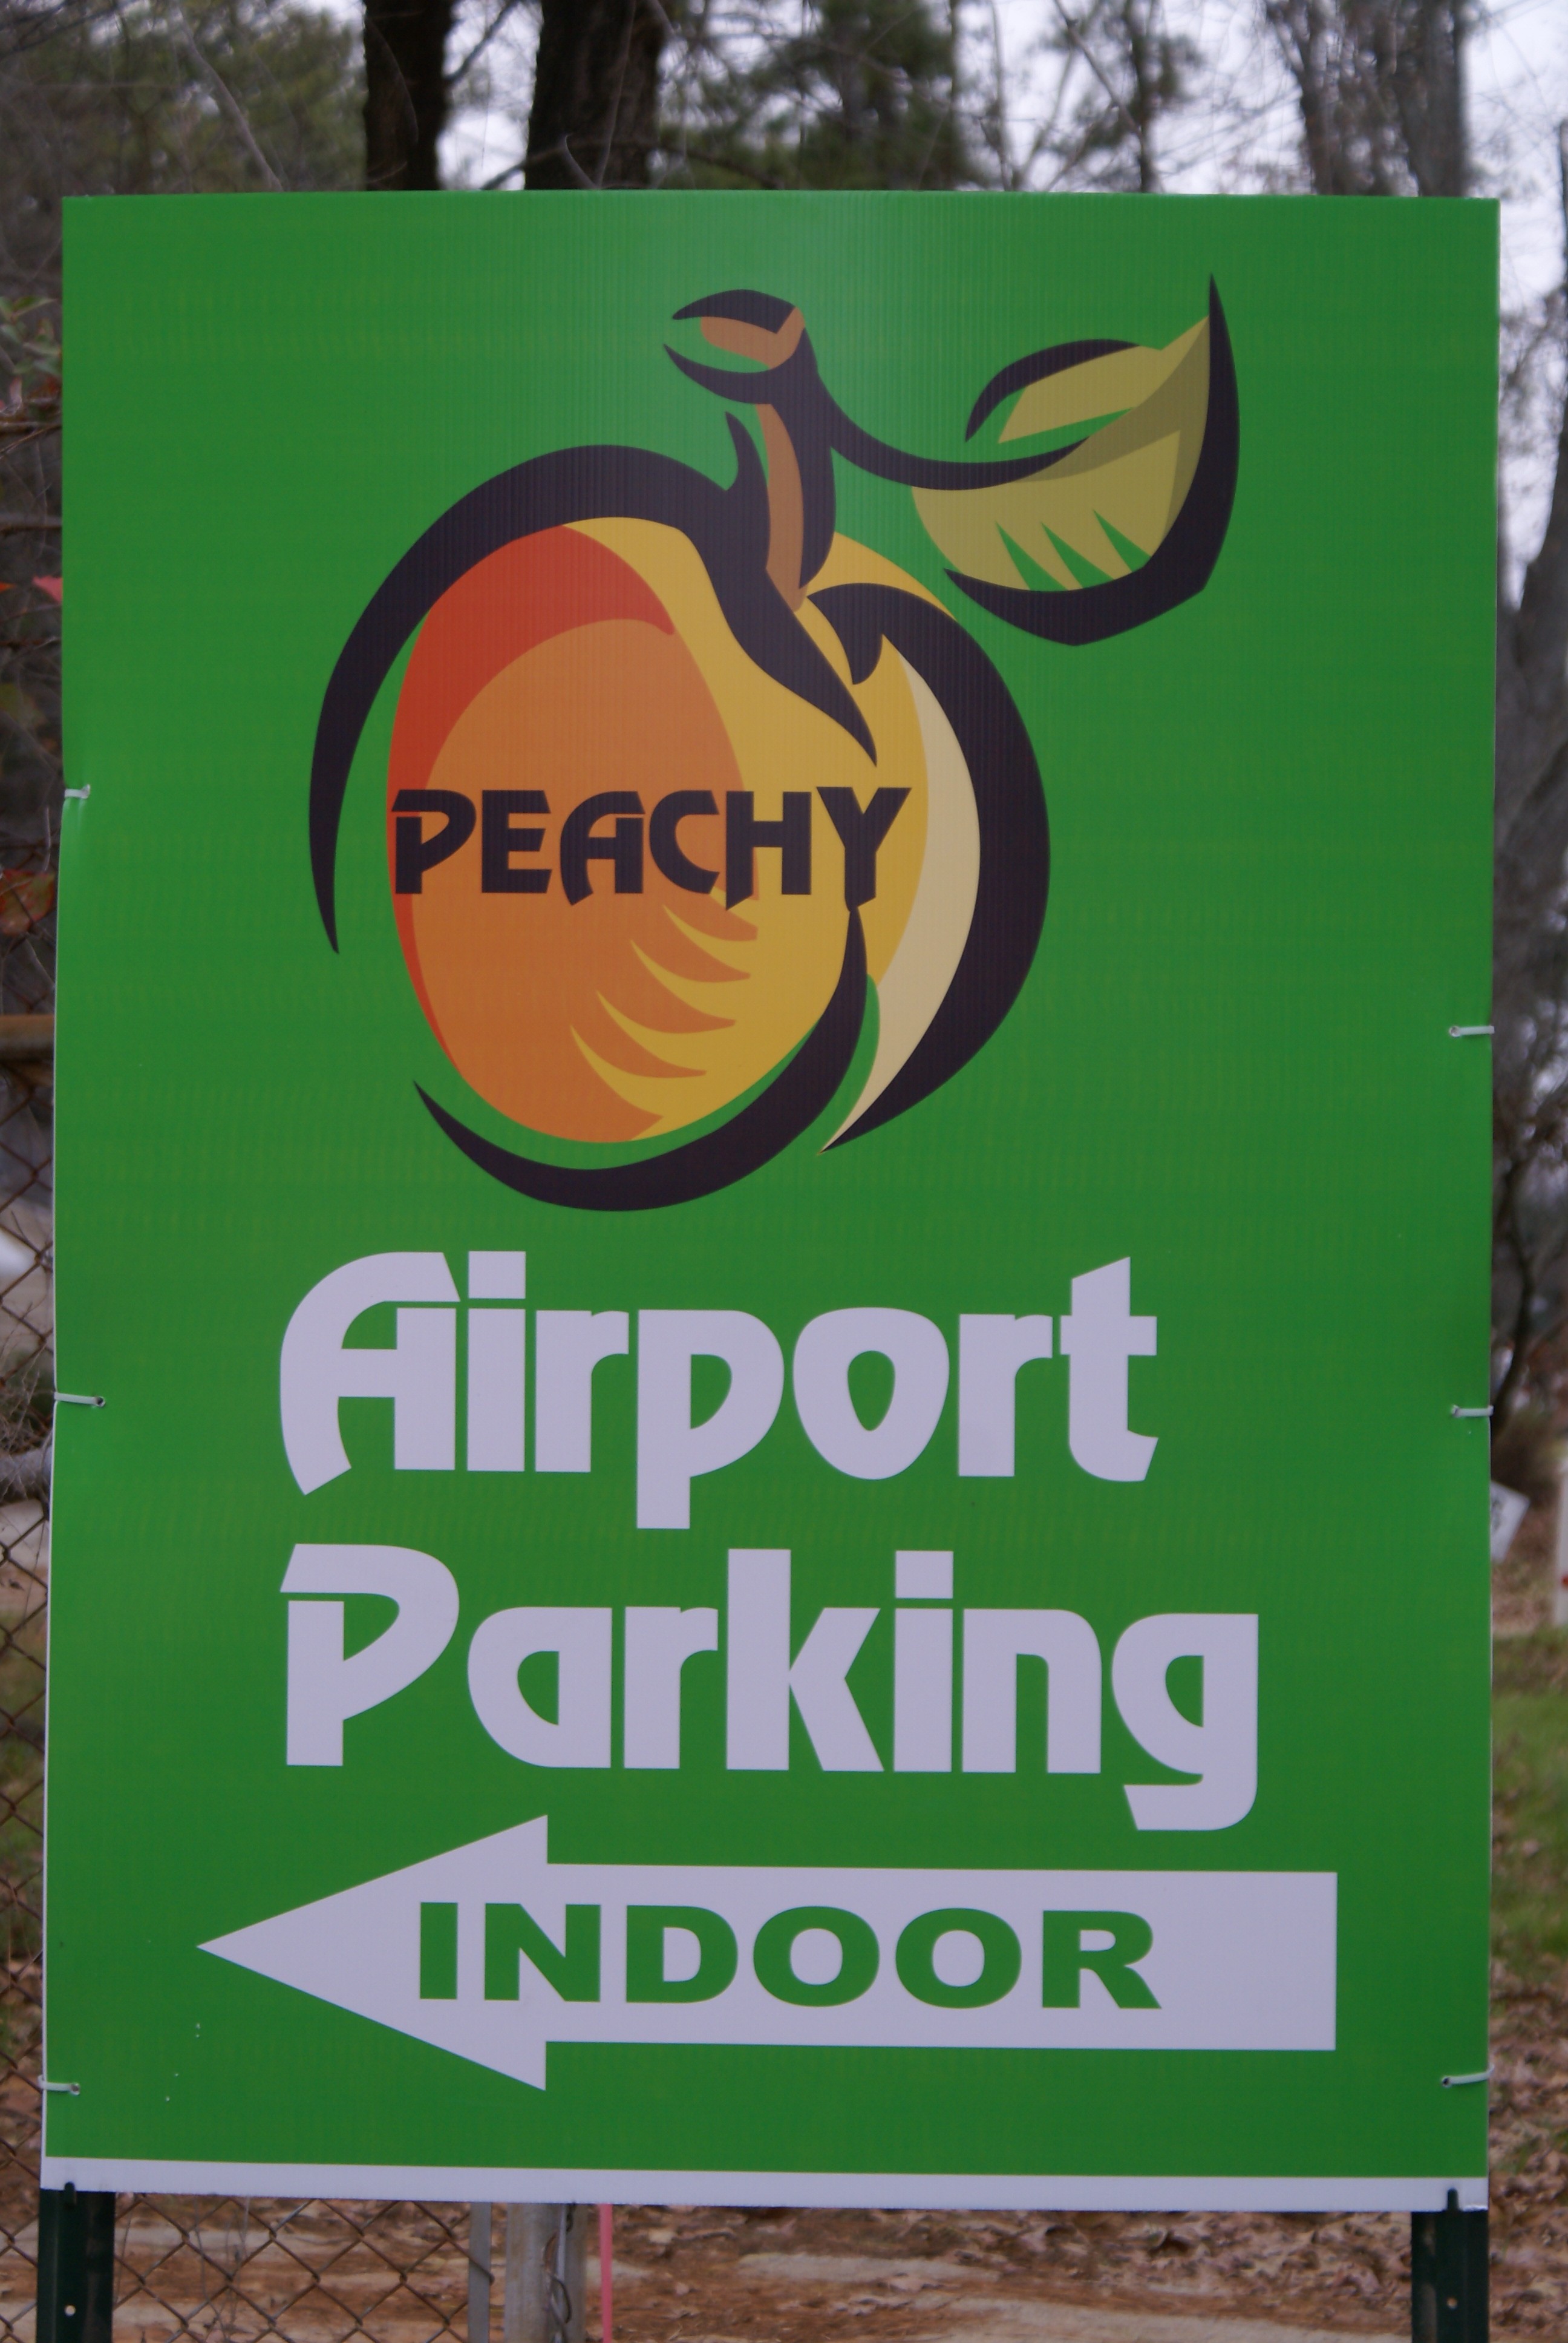 Peachy Airport Parking Curry SealNStripe